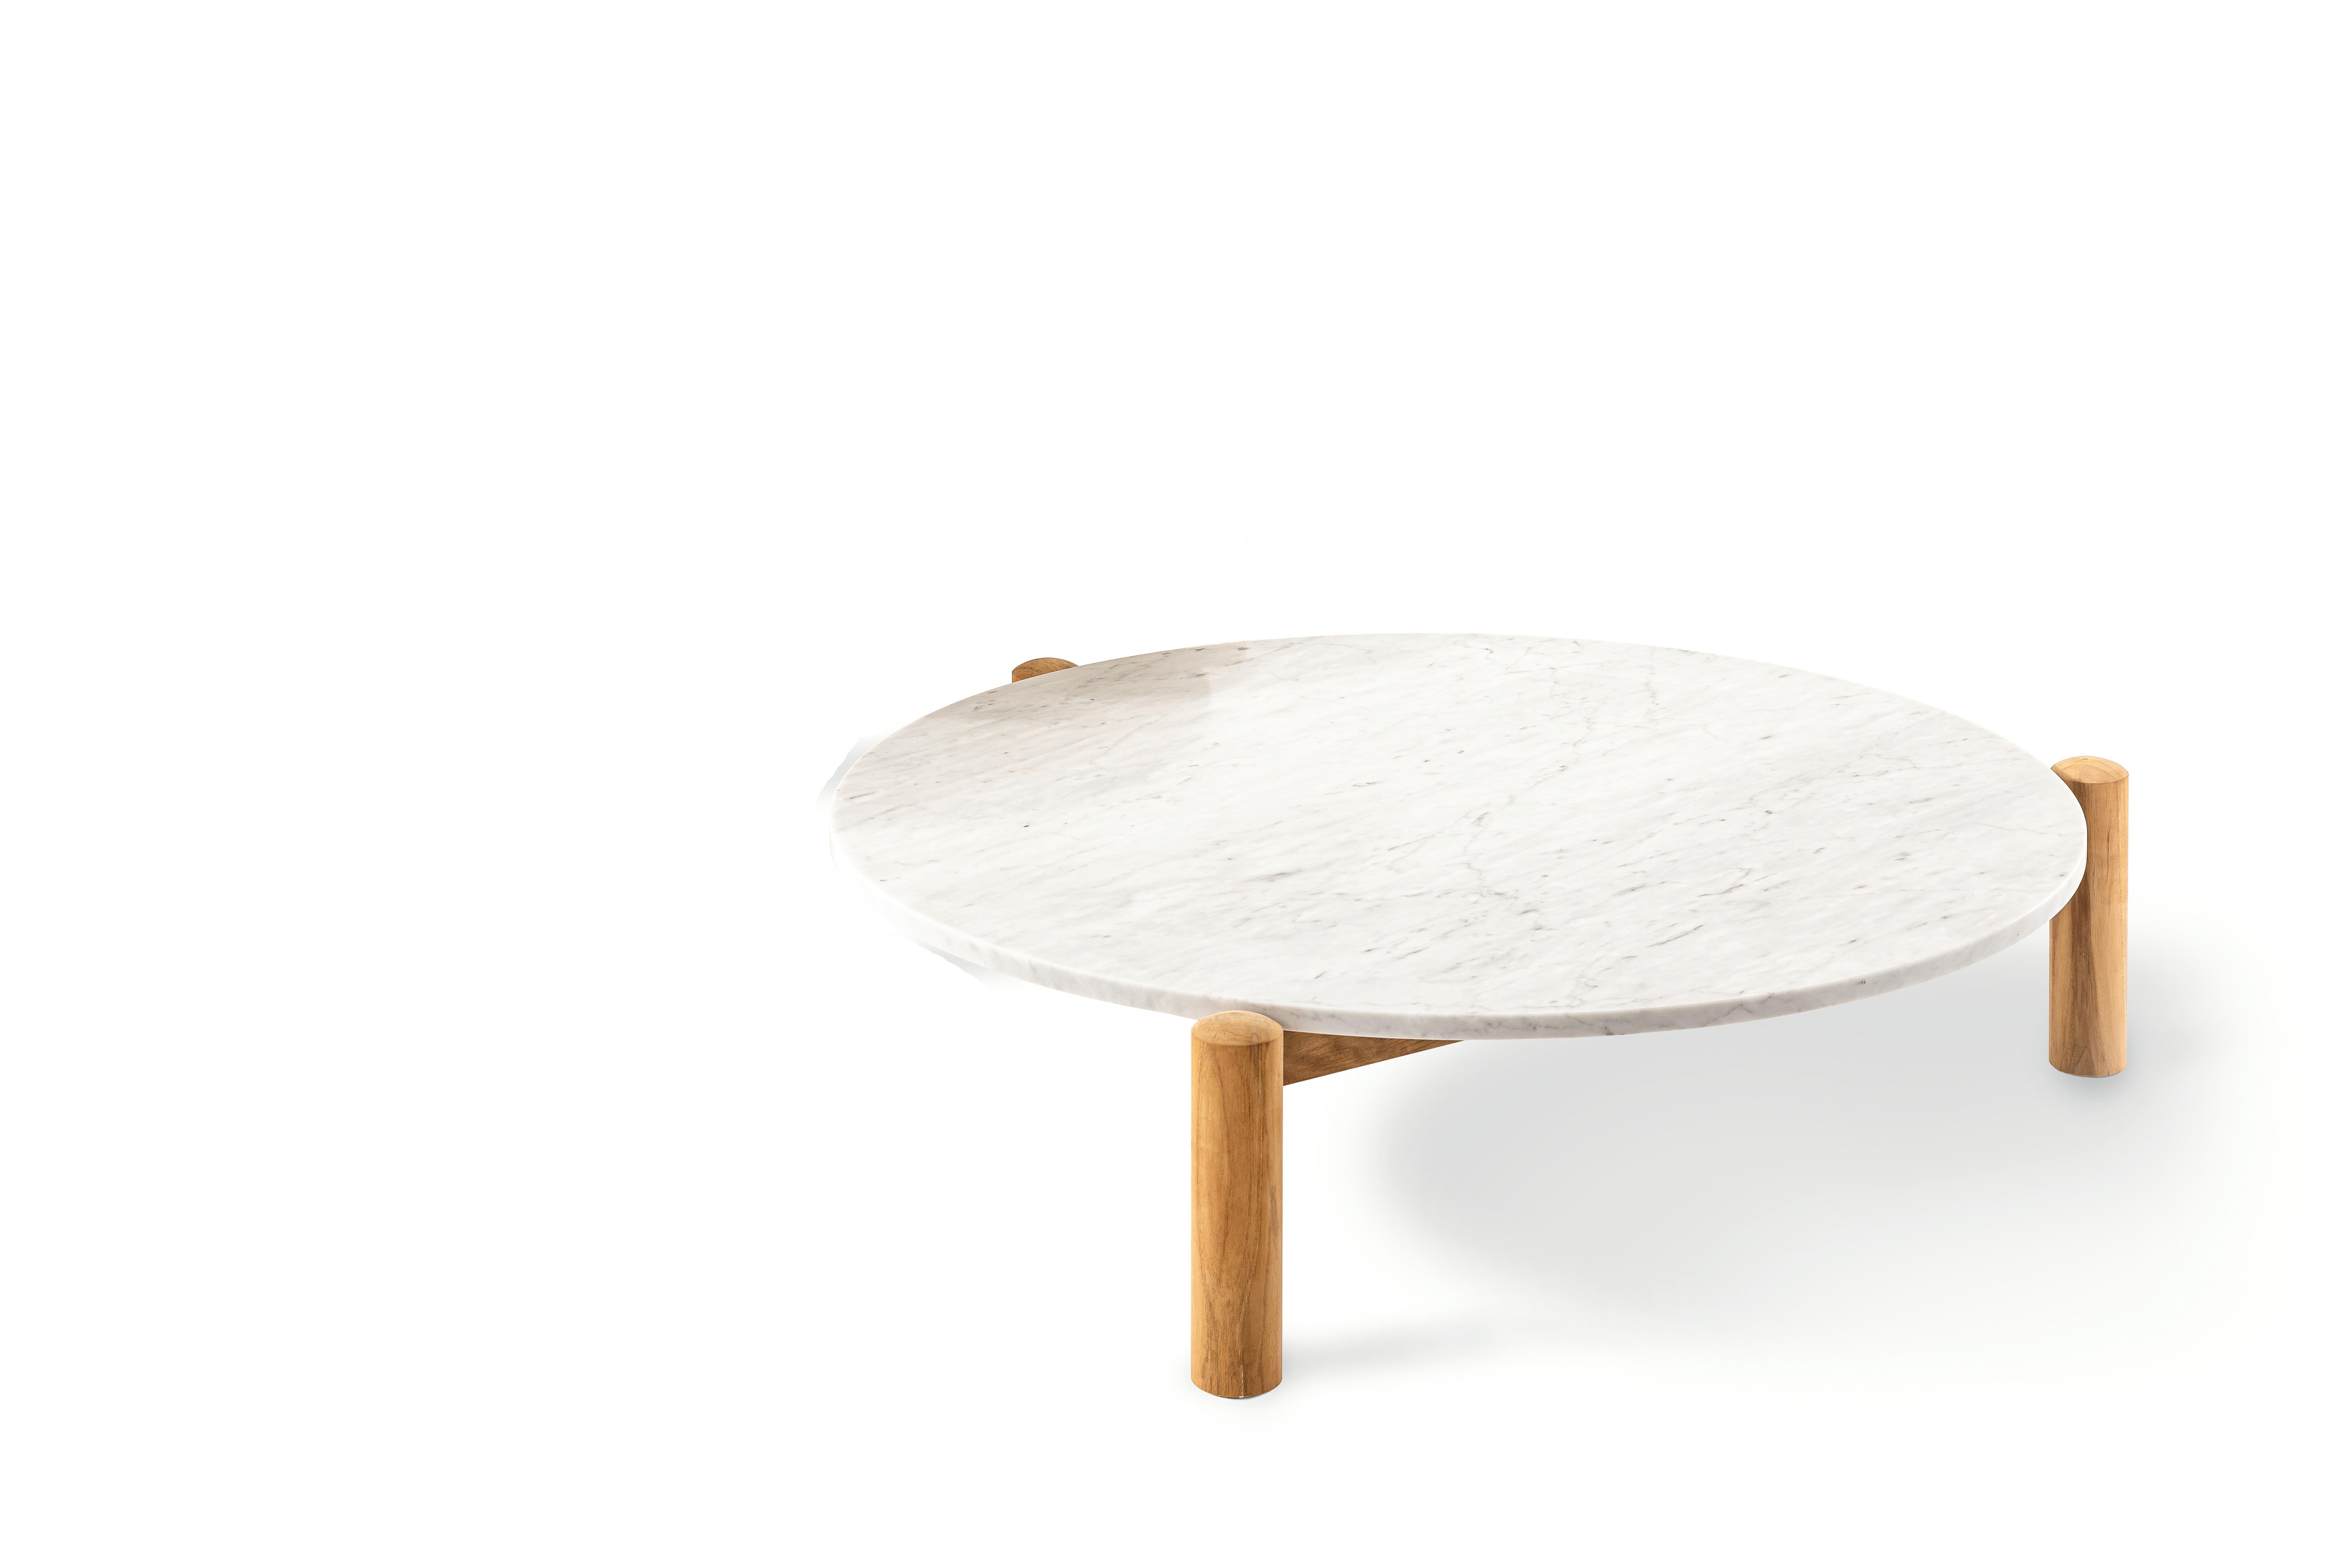 Contemporary Charlotte Perriand Marble Center Table à Plateau Interchangeable by Cassina